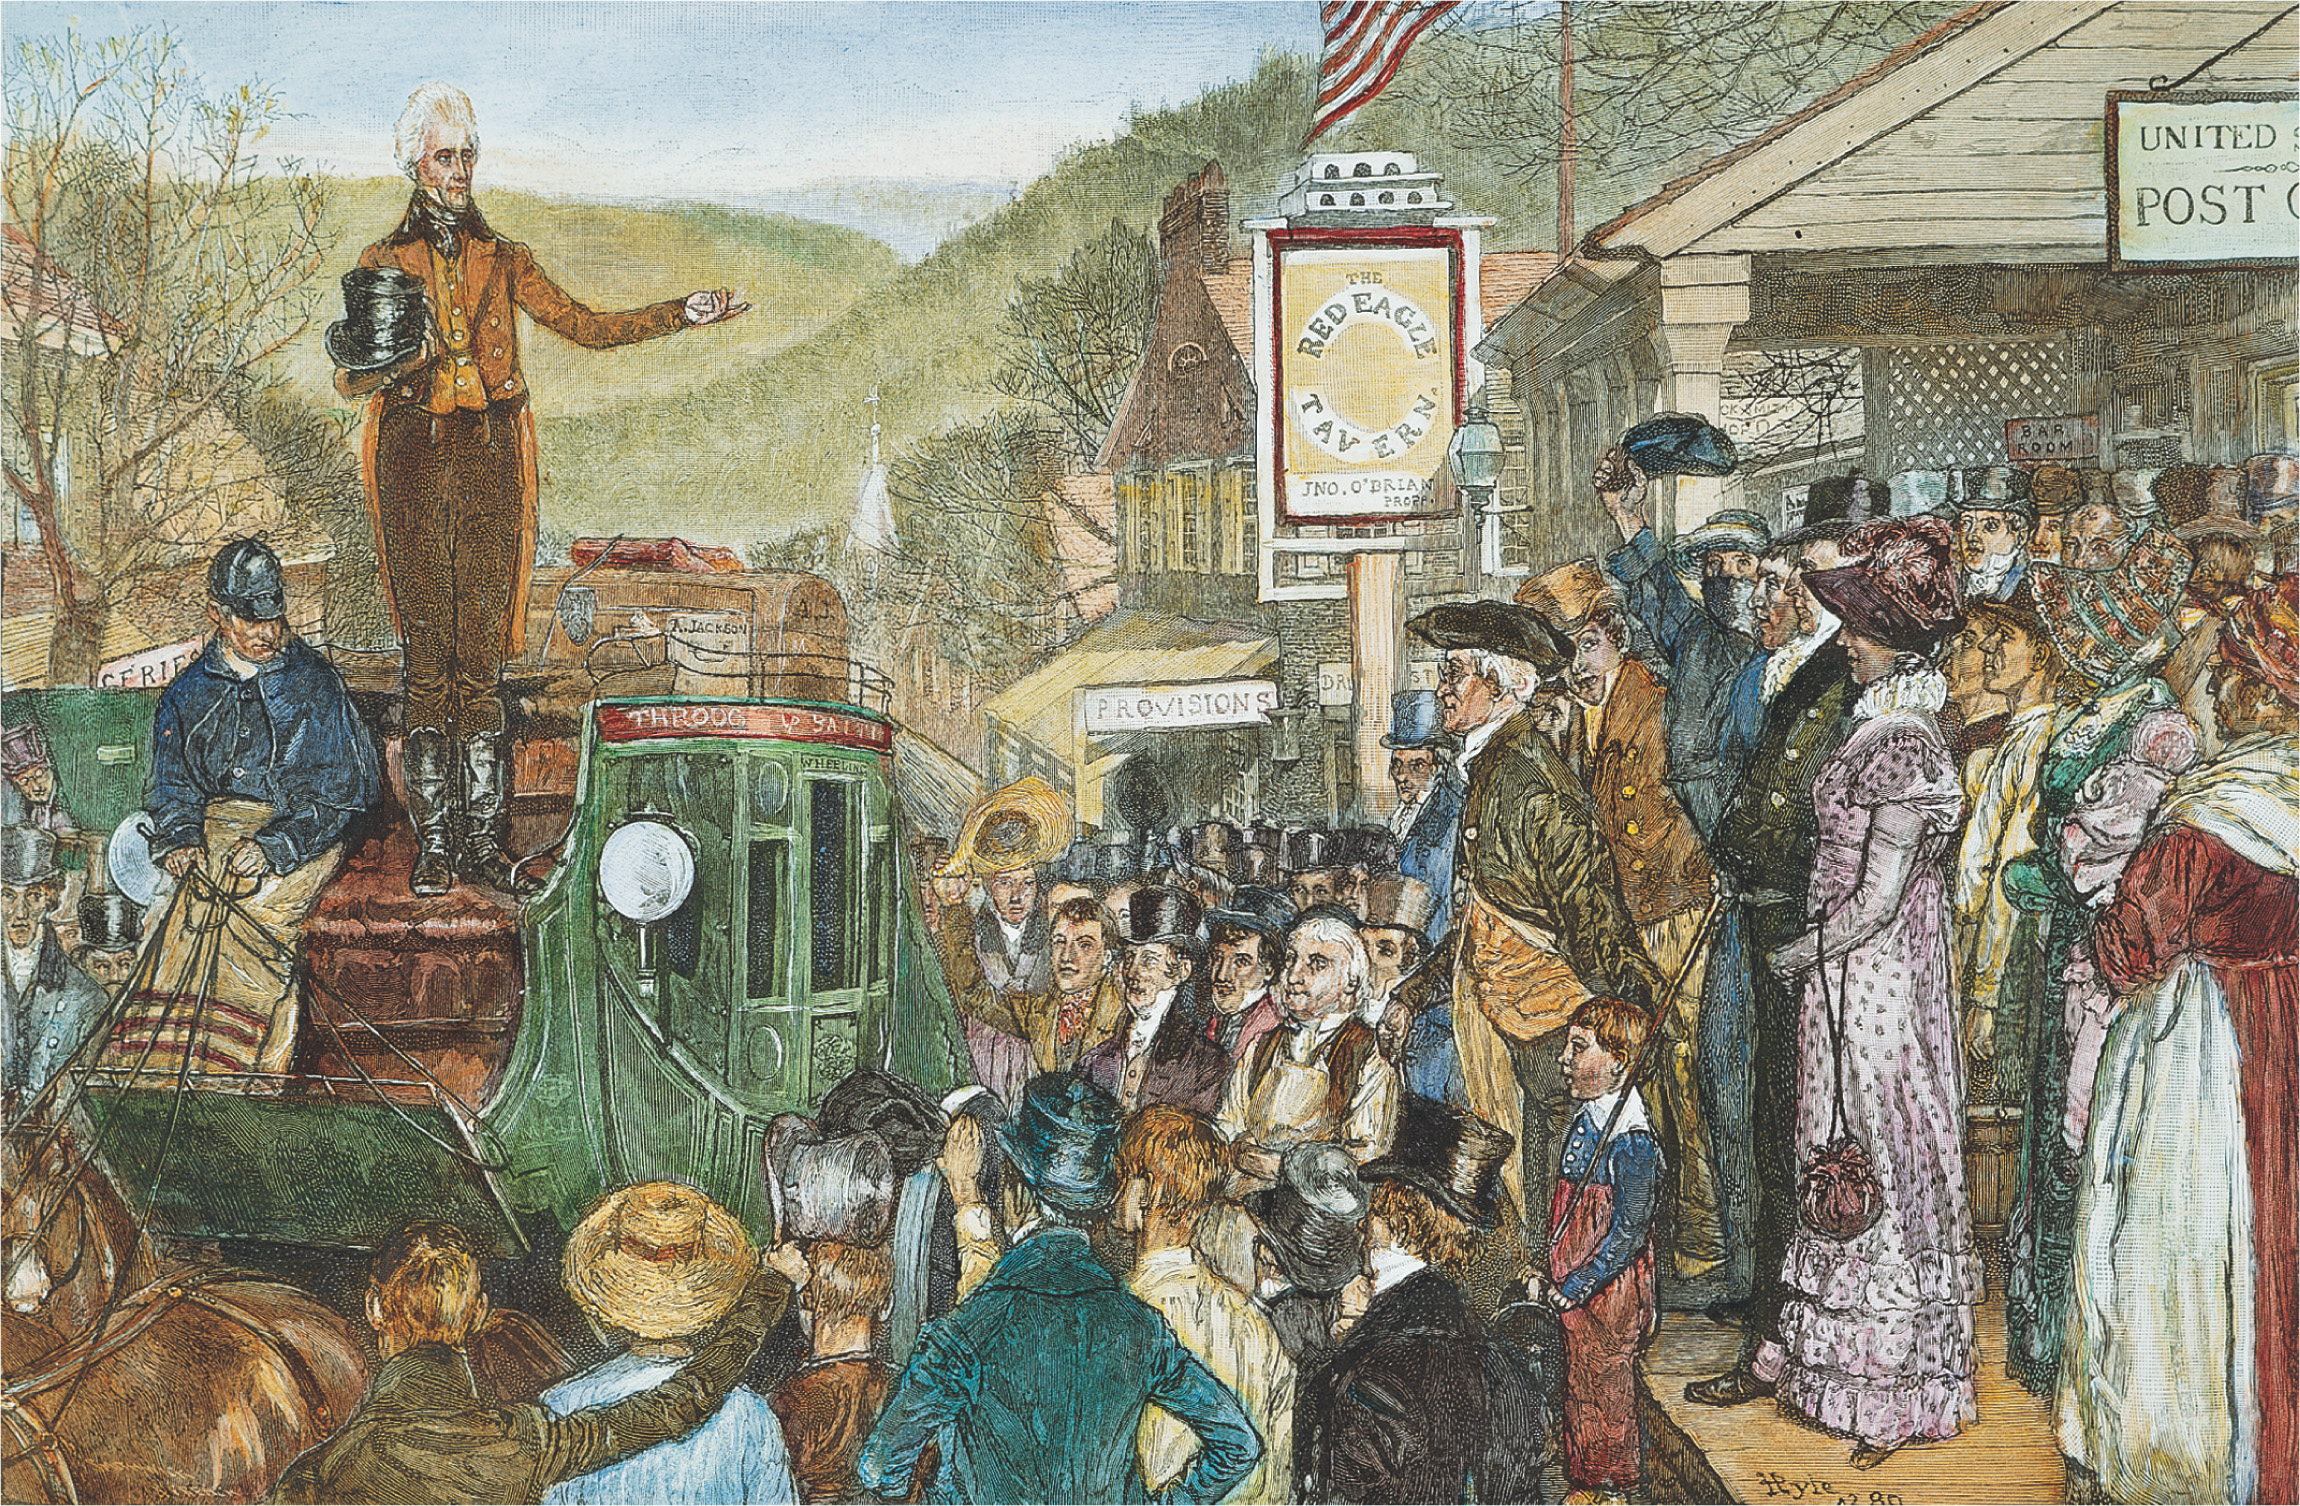 A painting: Andrew Jackson stands and waves from the front
seat of a carriage as it drives past a crowd in a village.